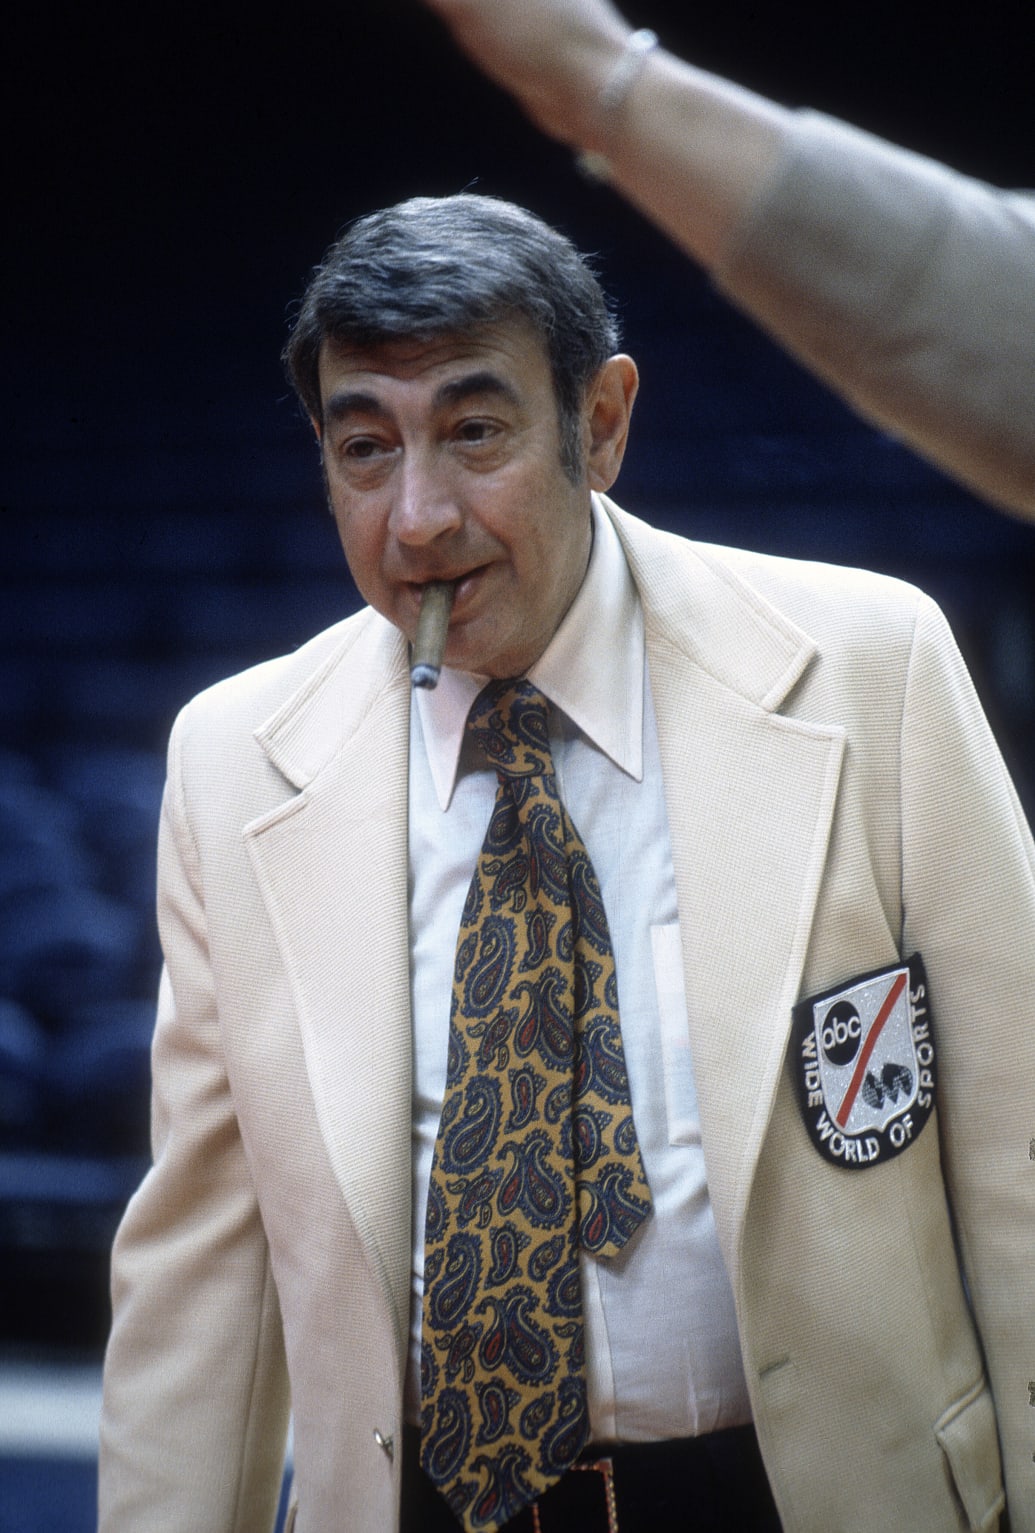 ABC sports commentator Howard Cosell smoking a cigar in 1972